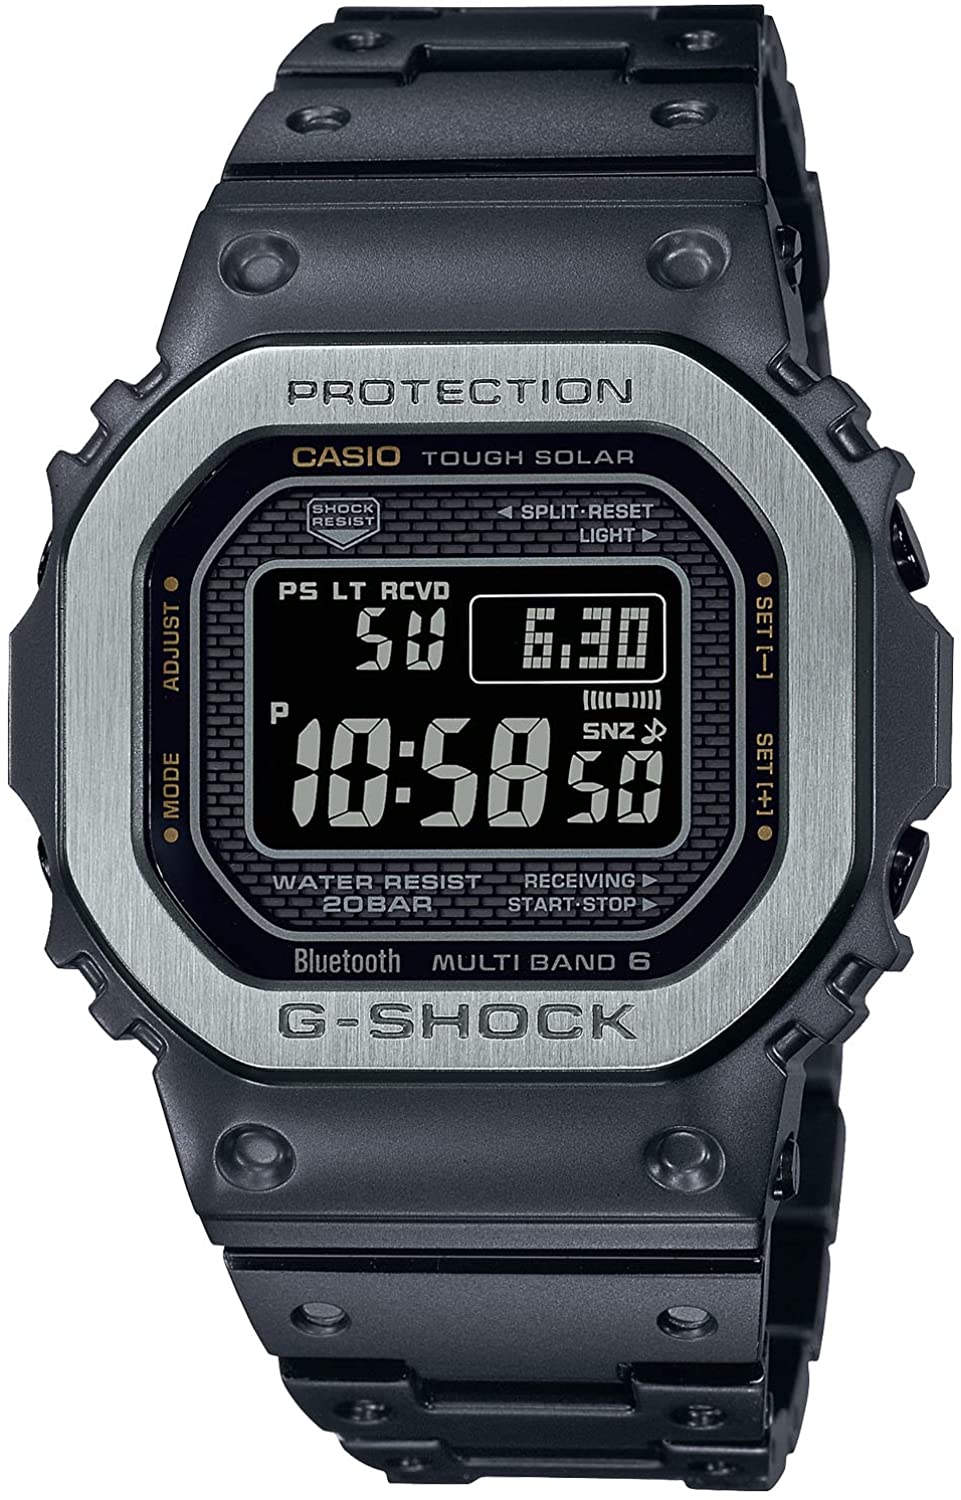 CASIO G-SHOCK GMW-B5000MB-1JF FULL METAL Connected - Discovery Japan Mall